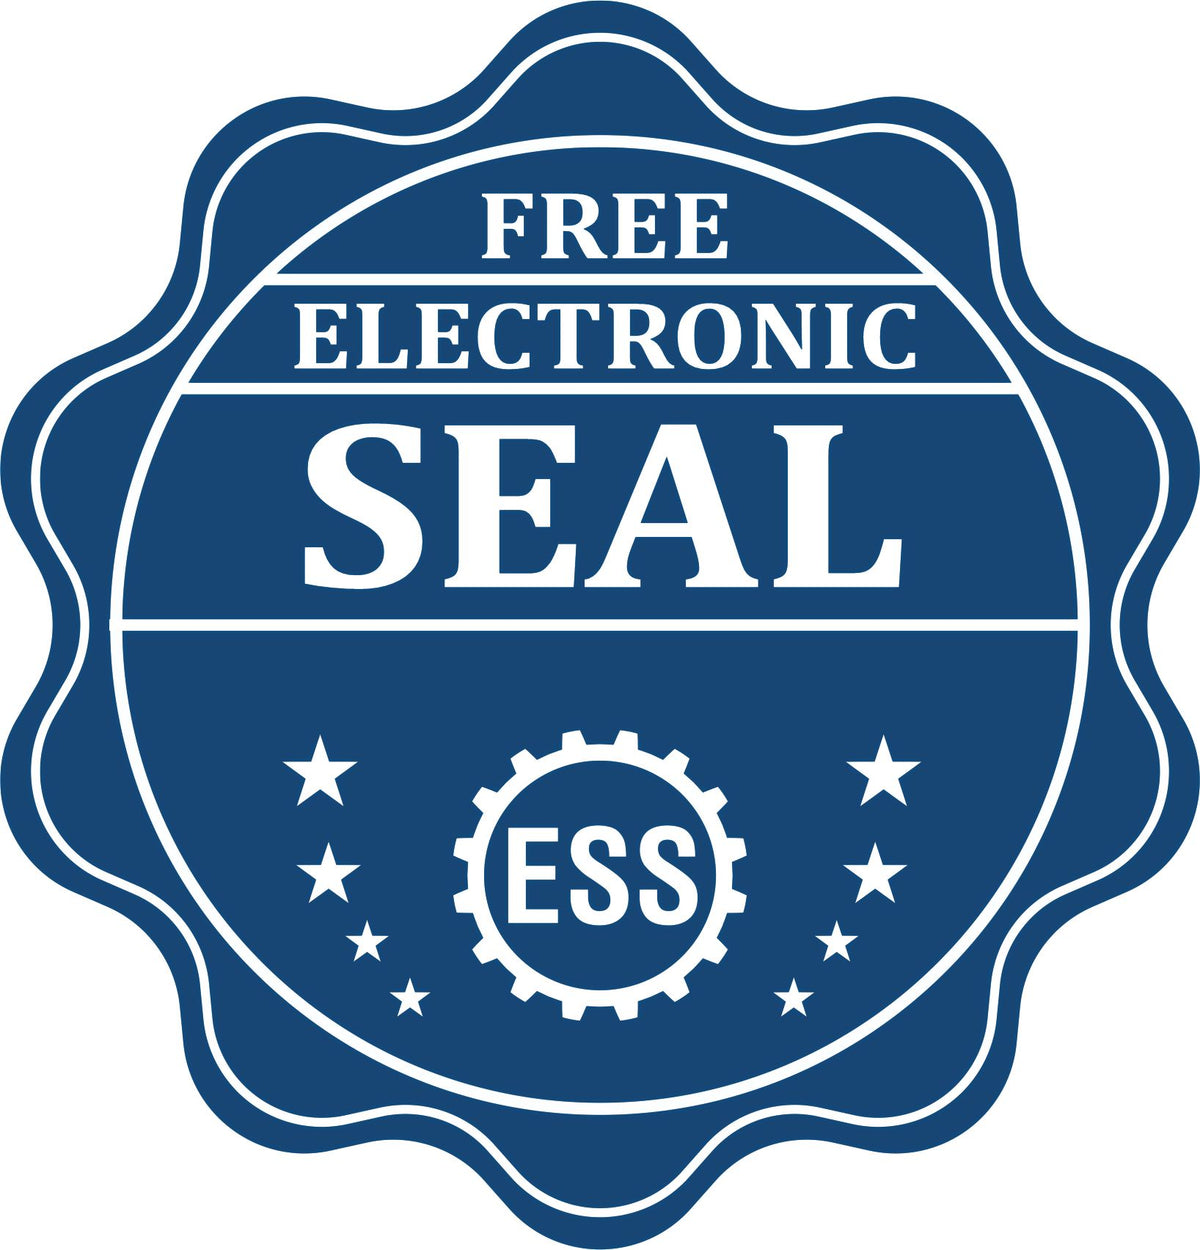 A badge showing a free electronic seal for the Heavy Duty Cast Iron Montana Geologist Seal Embosser with stars and the ESS gear on the emblem.